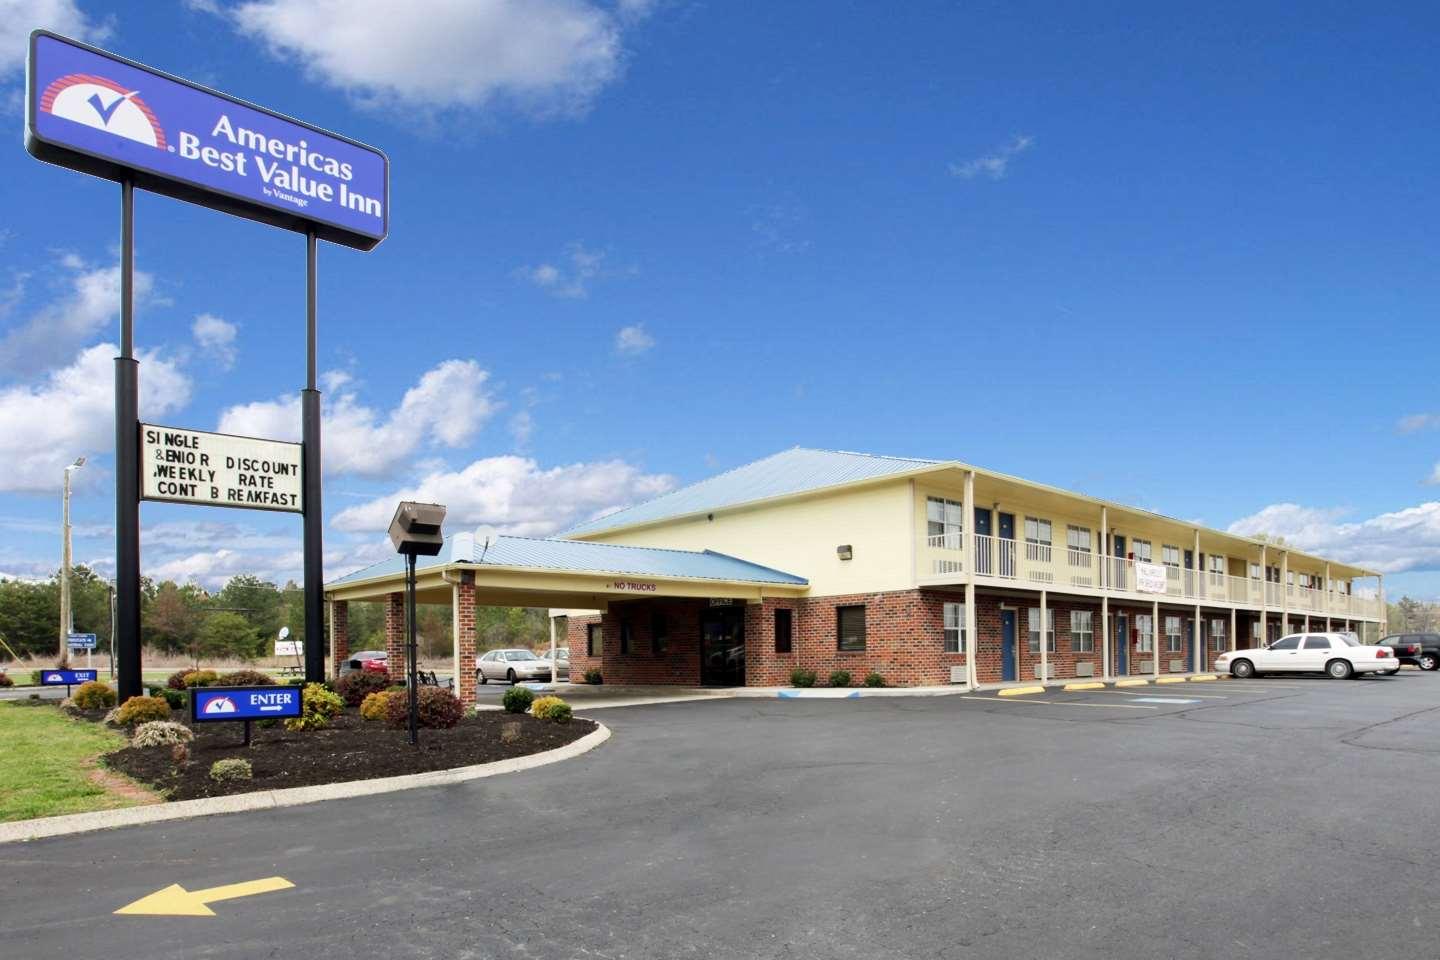 Americas Best Value Inn Athens, TN in Athens, TN